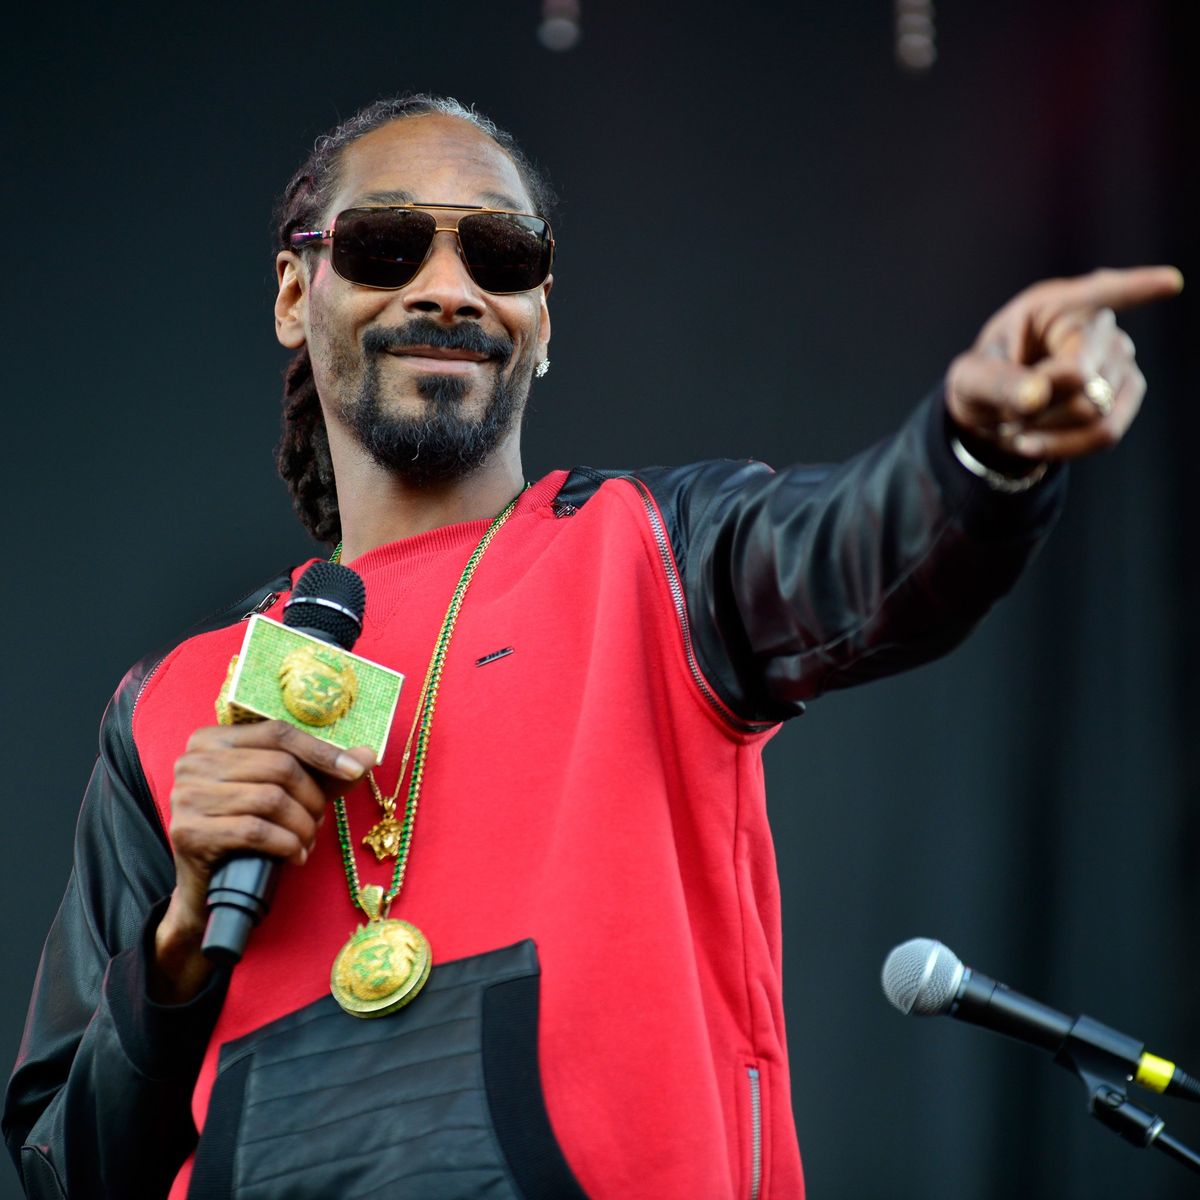 American rapper Snoop Dogg set to drop his first NFT